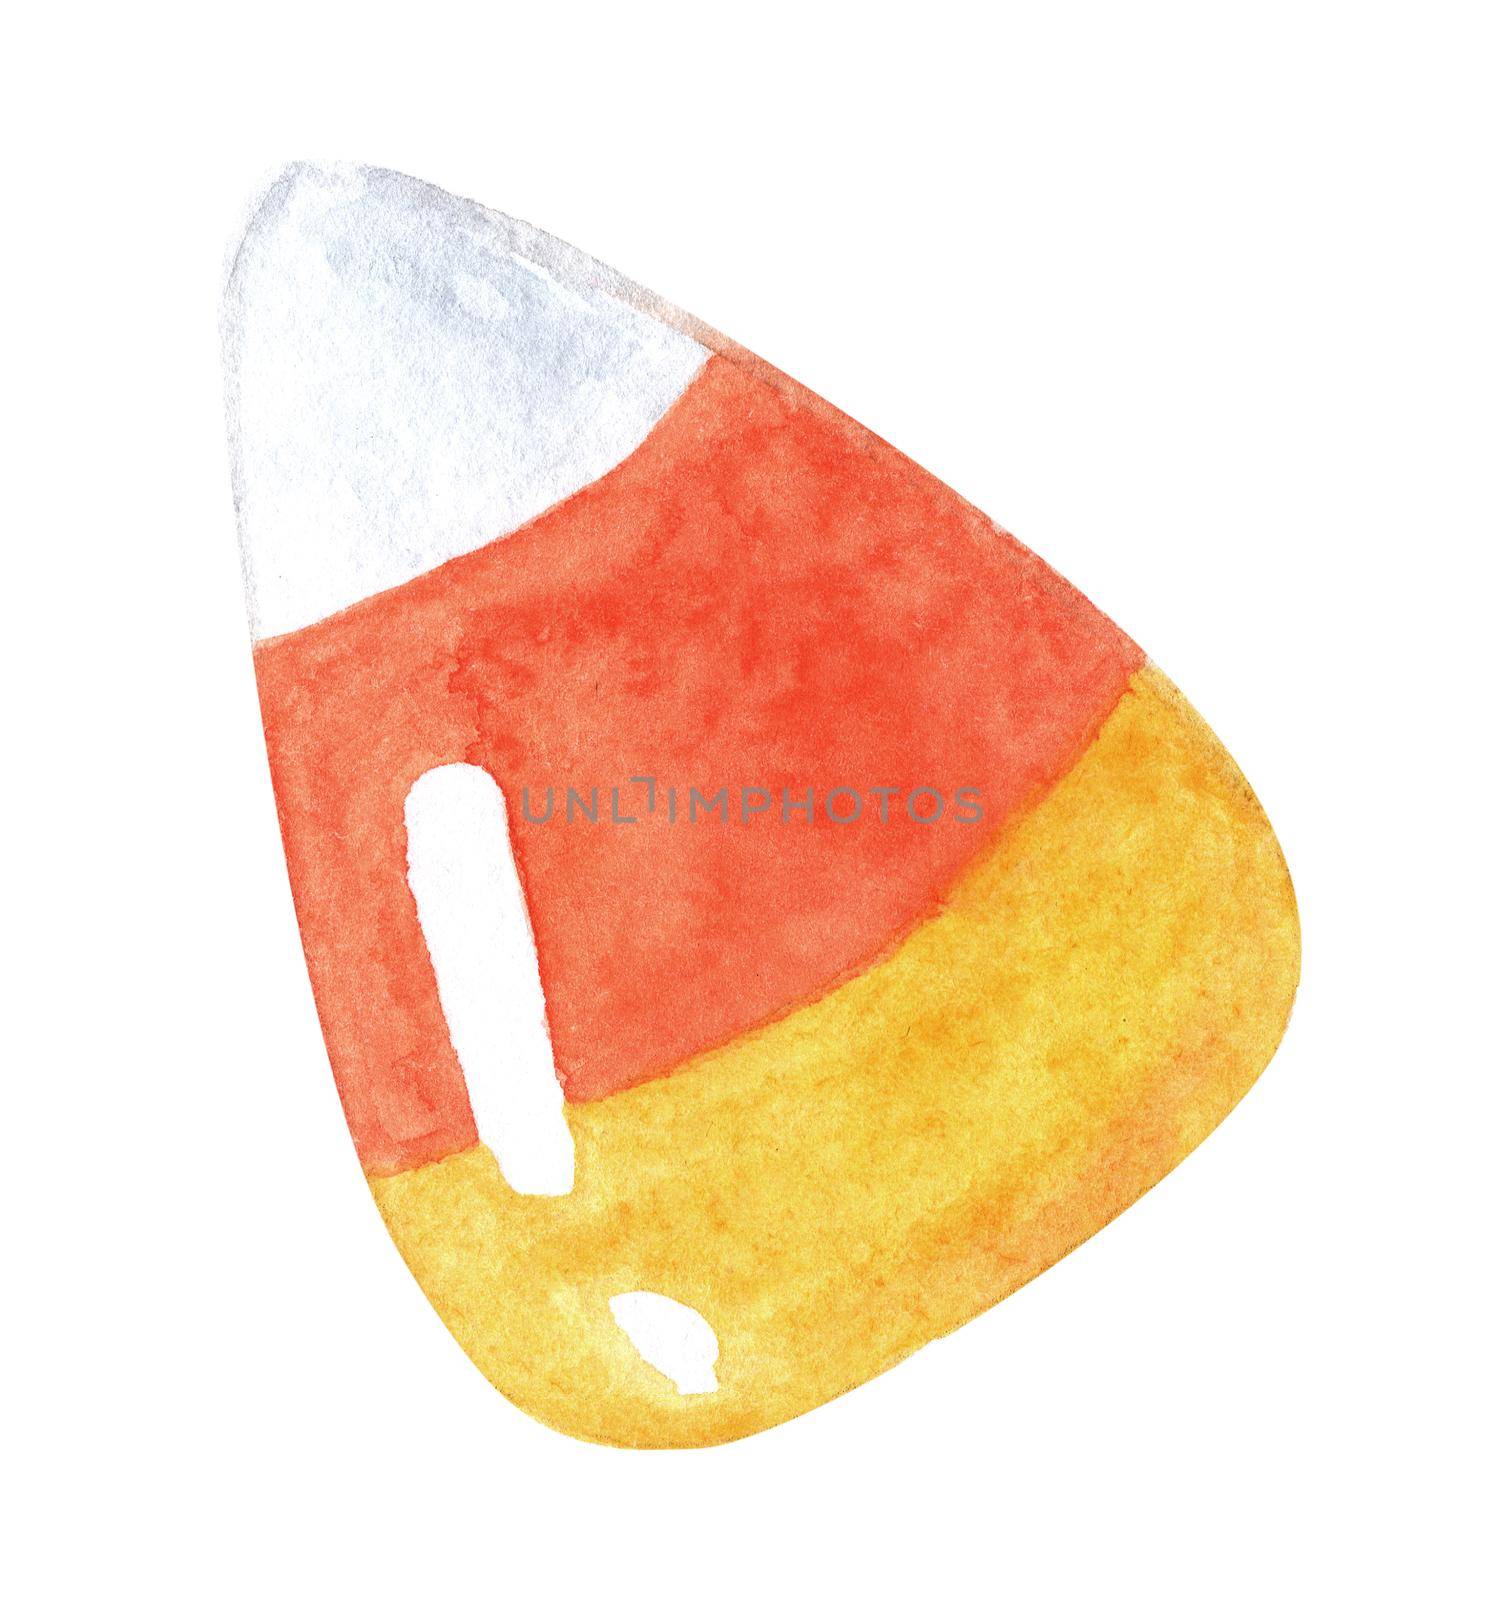 Watercolor candy corn halloween dessert isolated on white by dreamloud